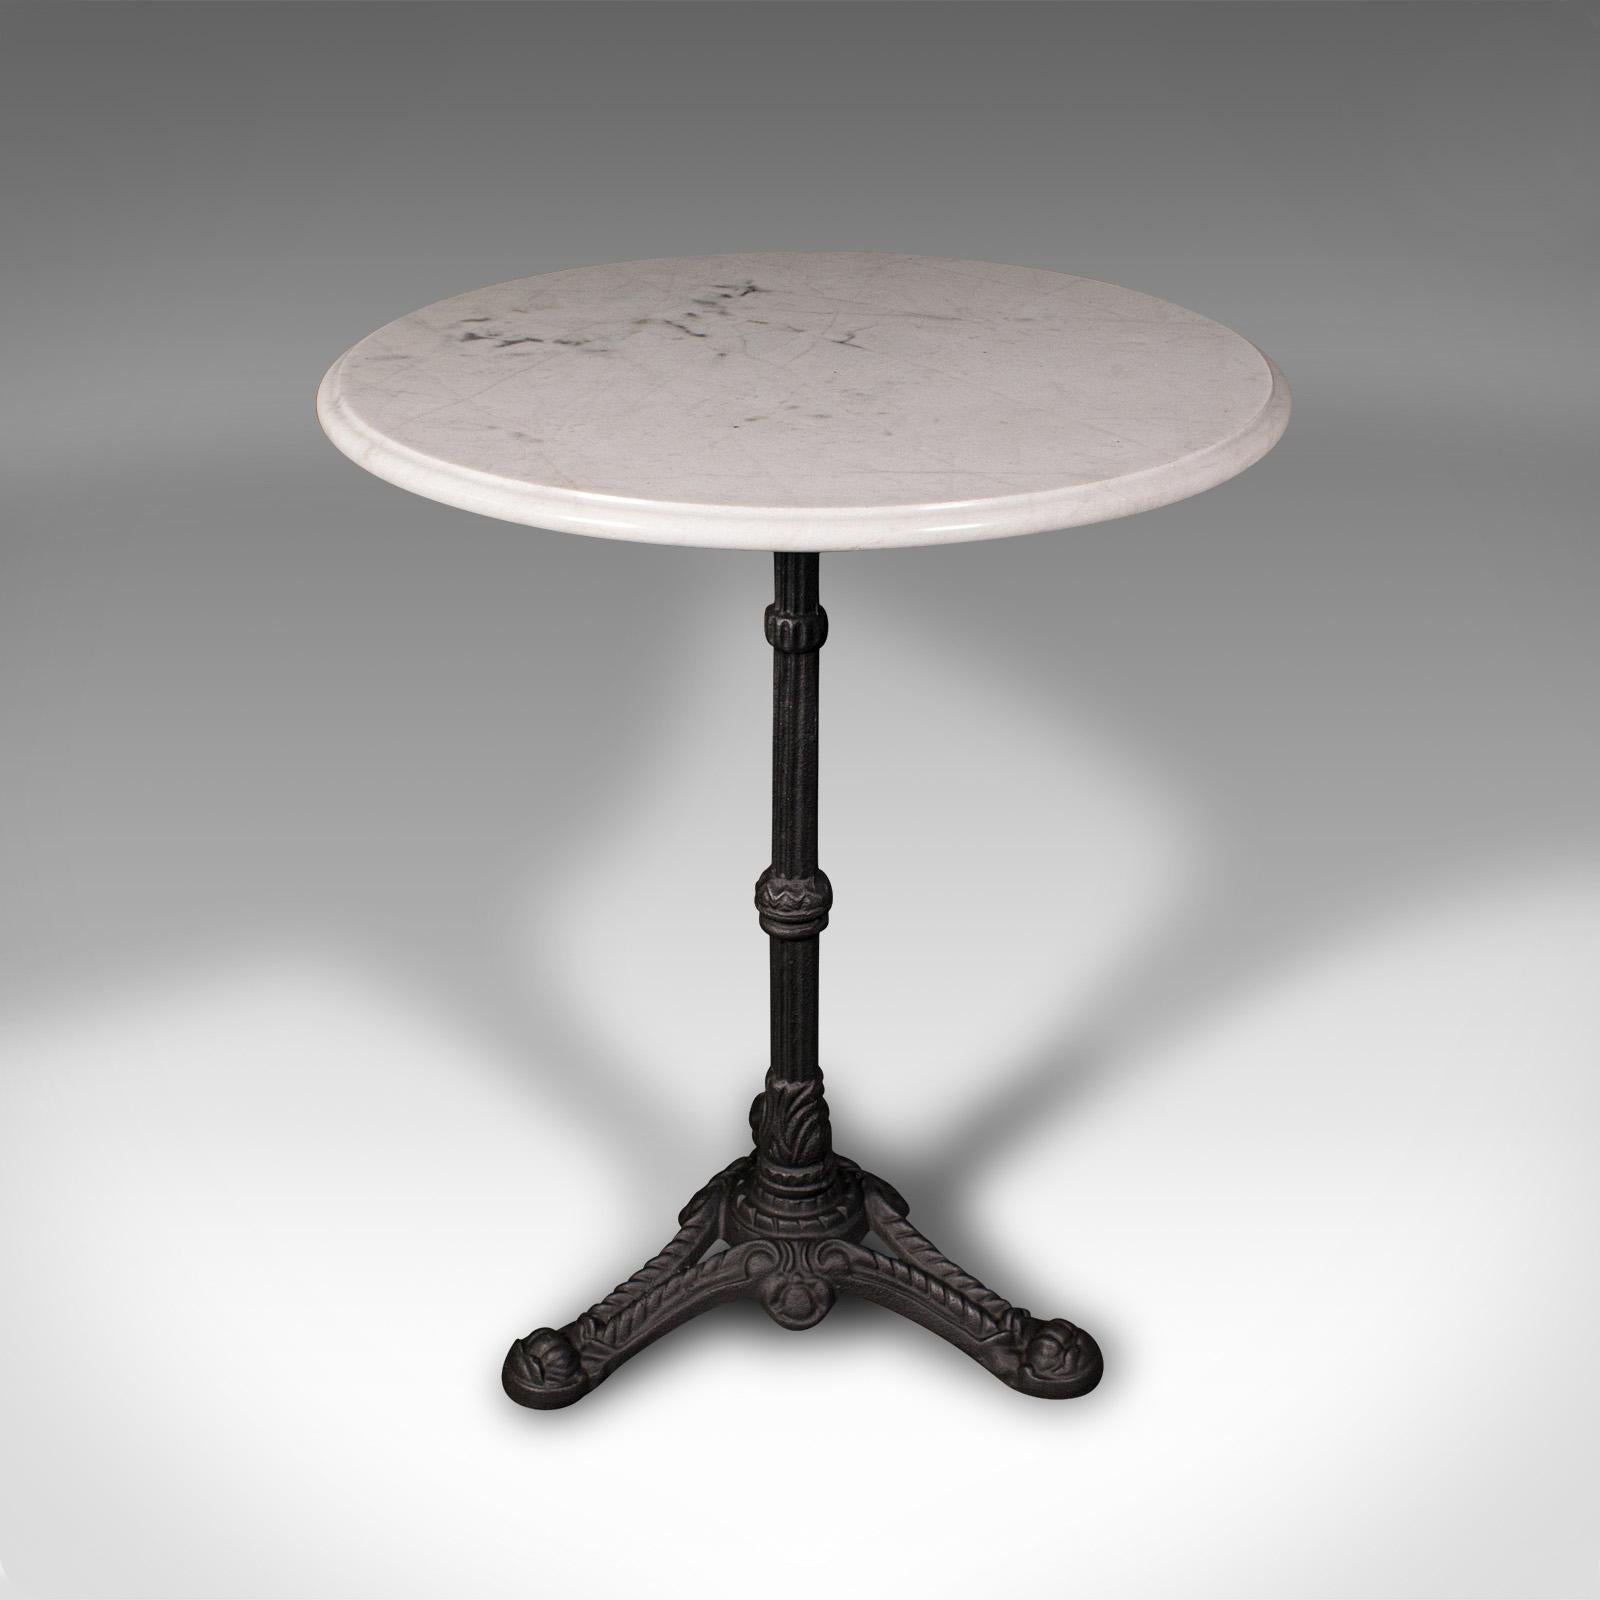 This is a vintage cafe table. A French, marble and cast iron wine or garden table, dating to the mid 20th century, circa 1950.

Pleasingly chic table with a delightful marble top
Displays a desirable aged patina and in good order
Tactile white